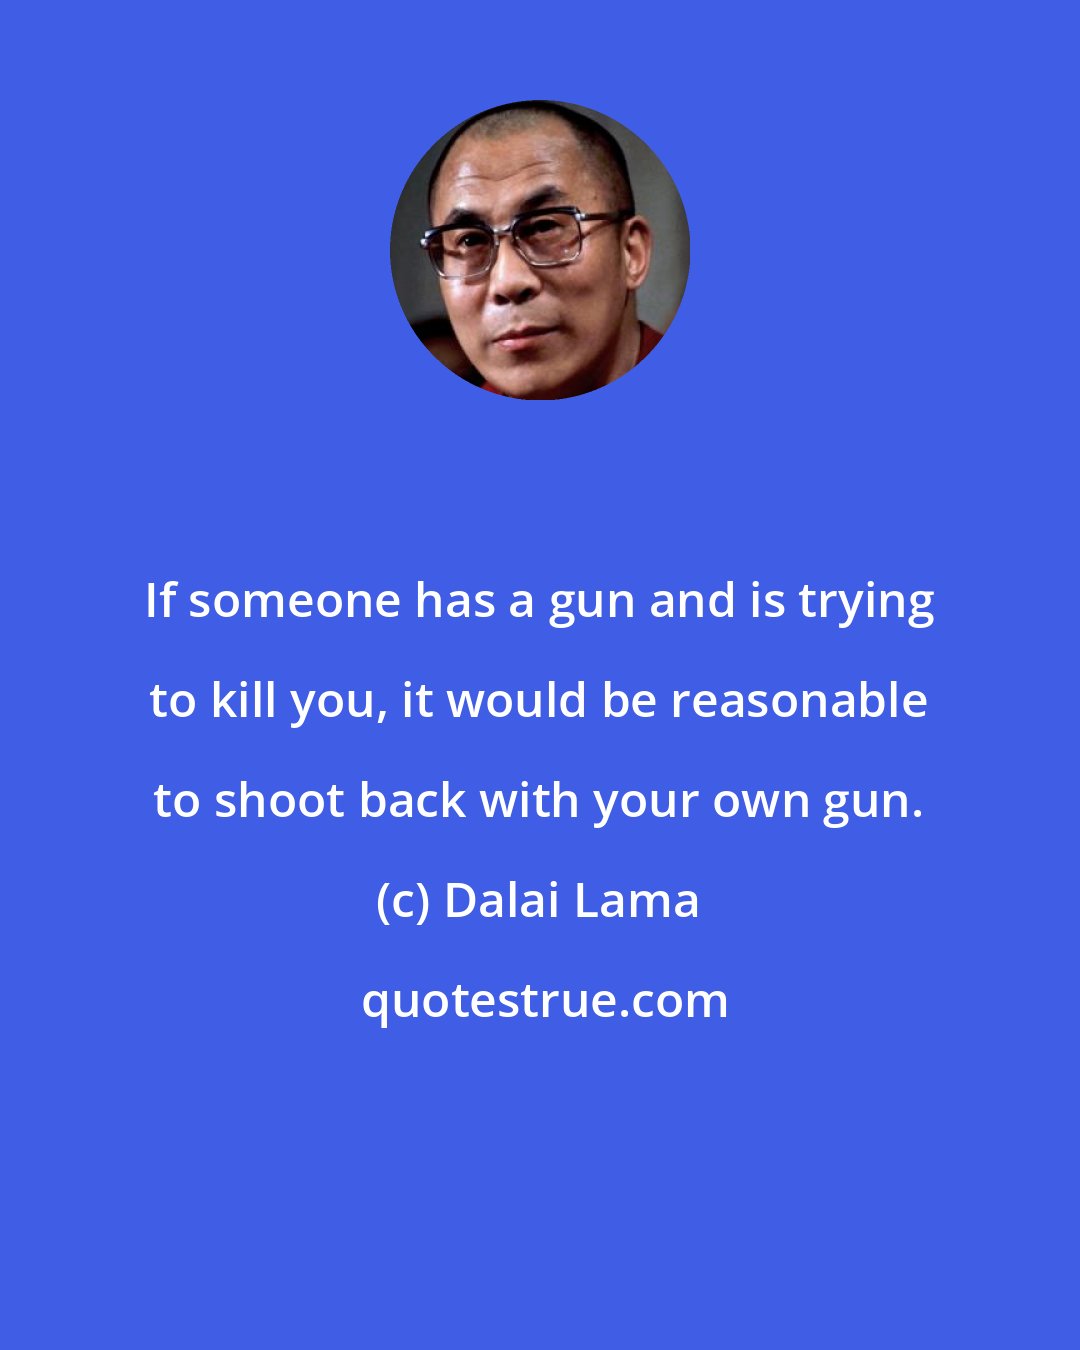 Dalai Lama: If someone has a gun and is trying to kill you, it would be reasonable to shoot back with your own gun.